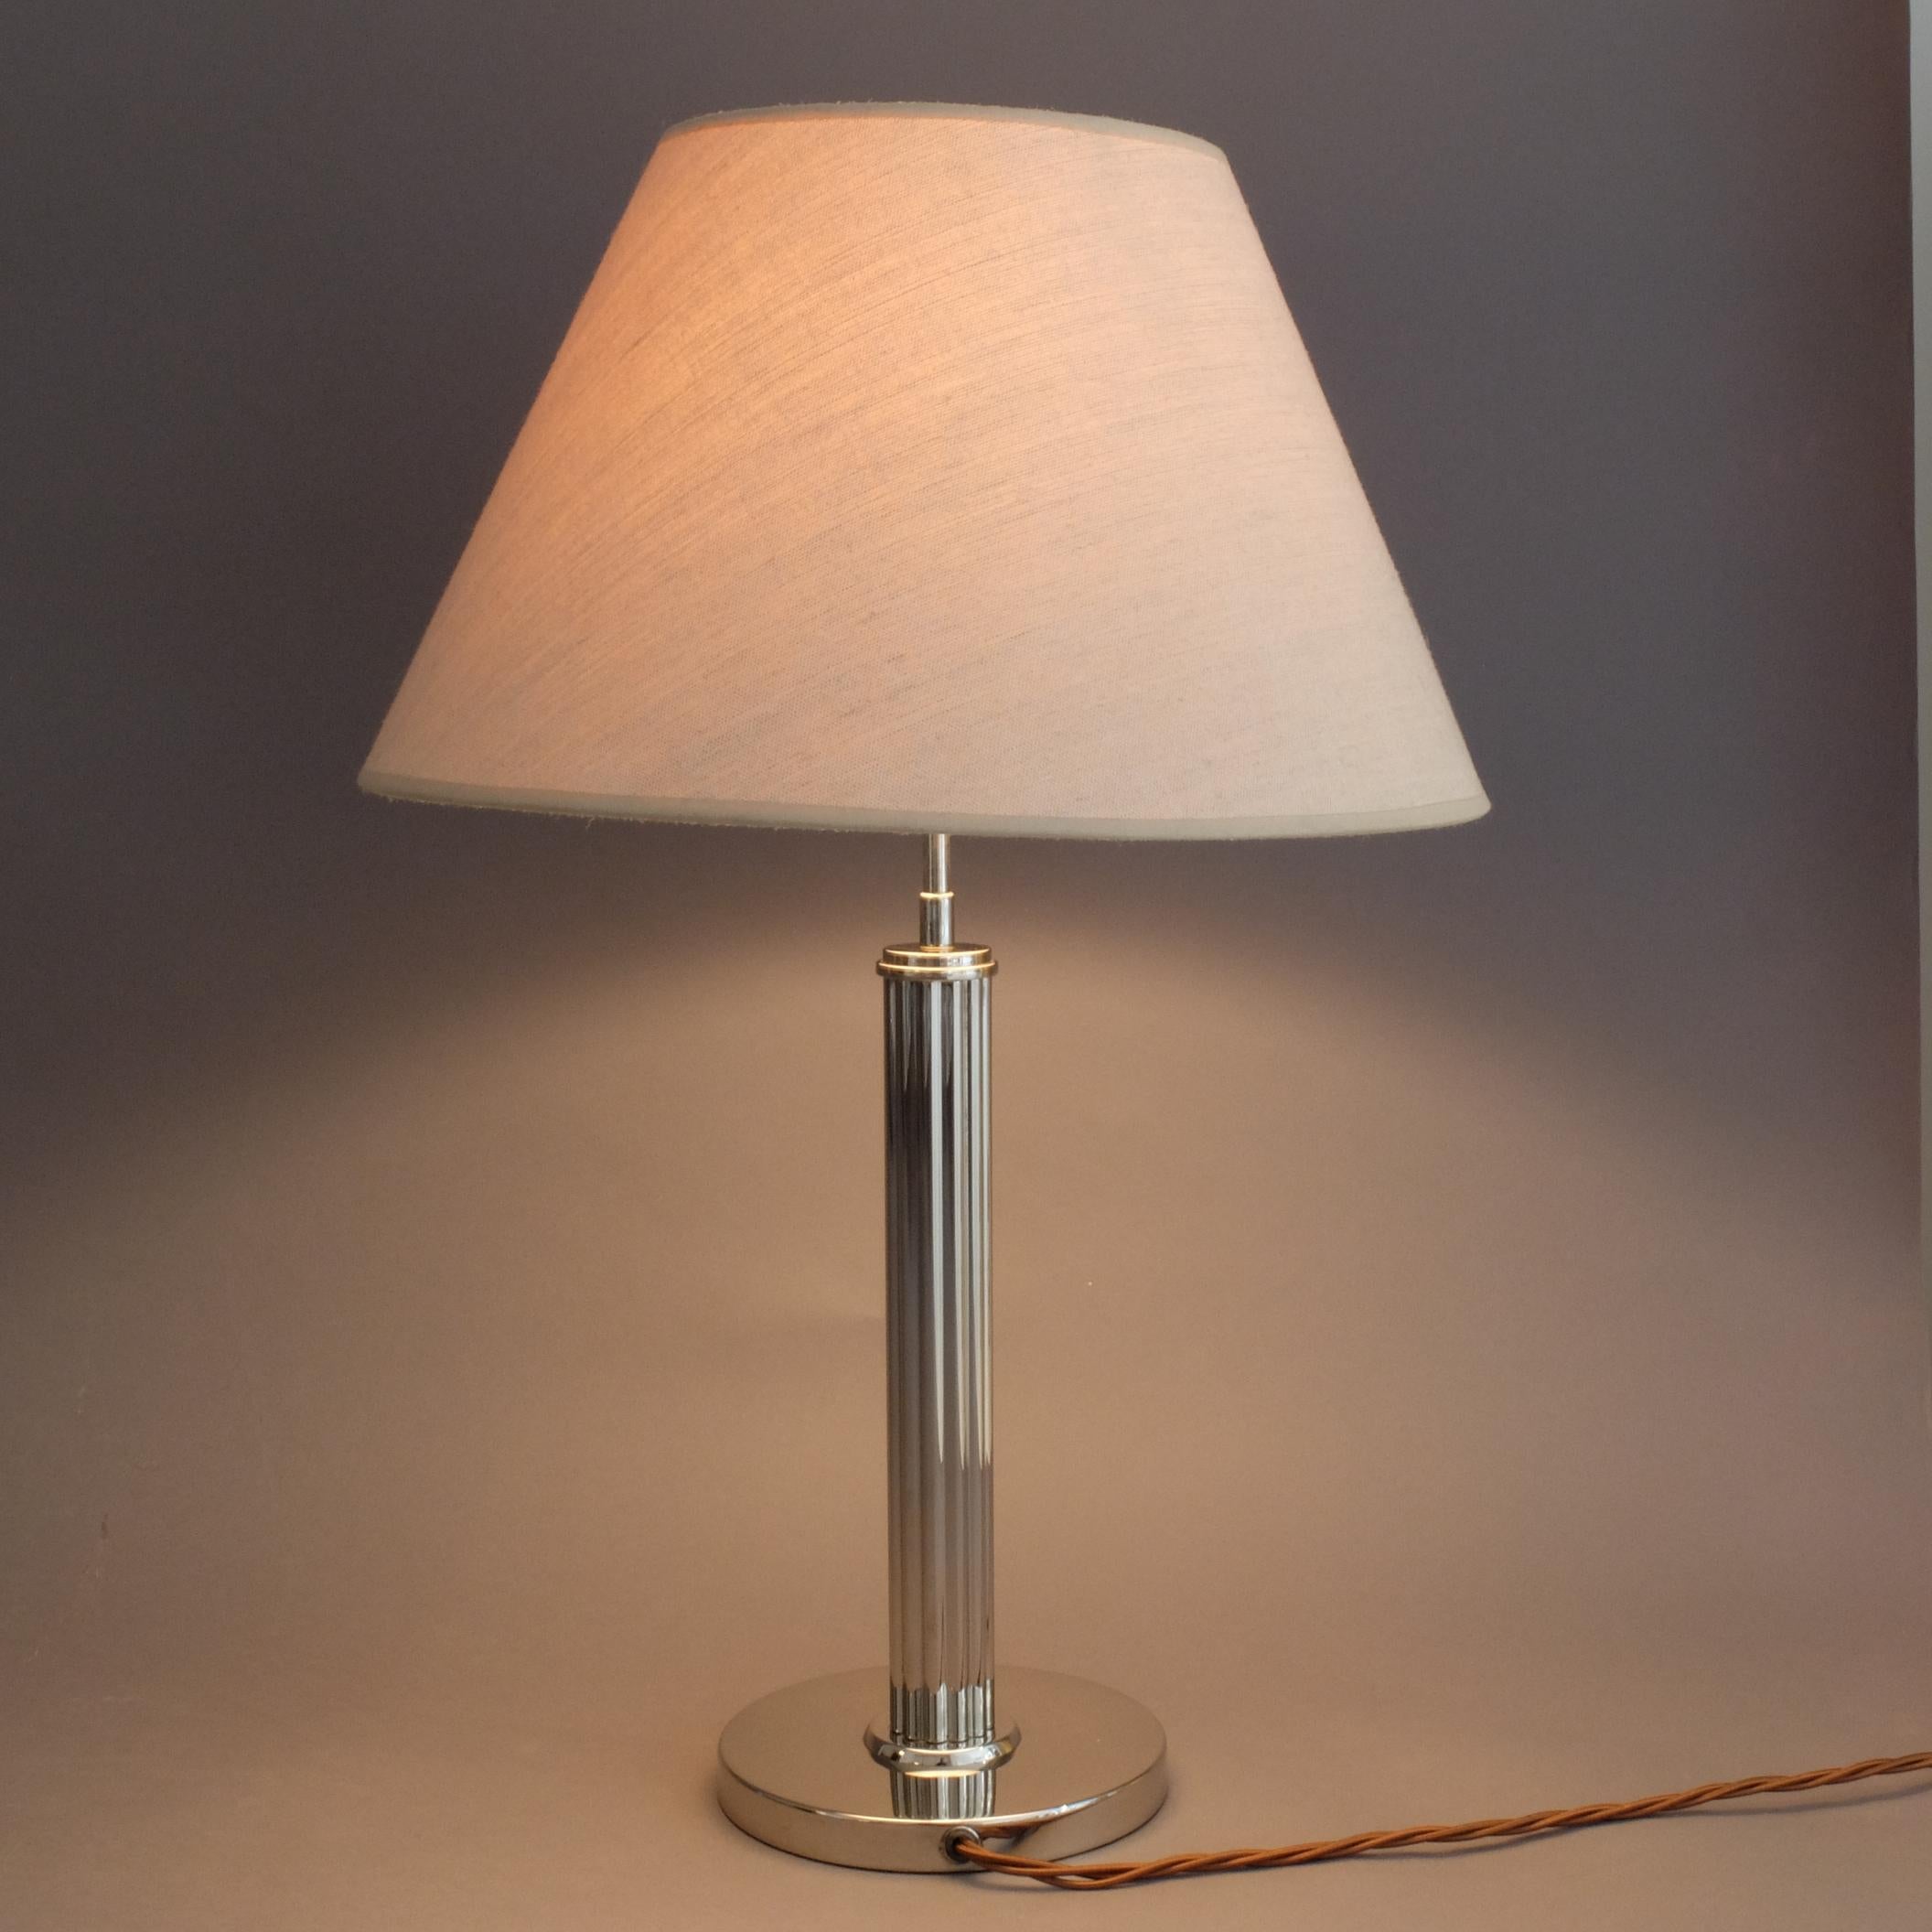 Originally given to US officer based in Germany after the war.
Great as bedside table or desk lamp. Free shipping.